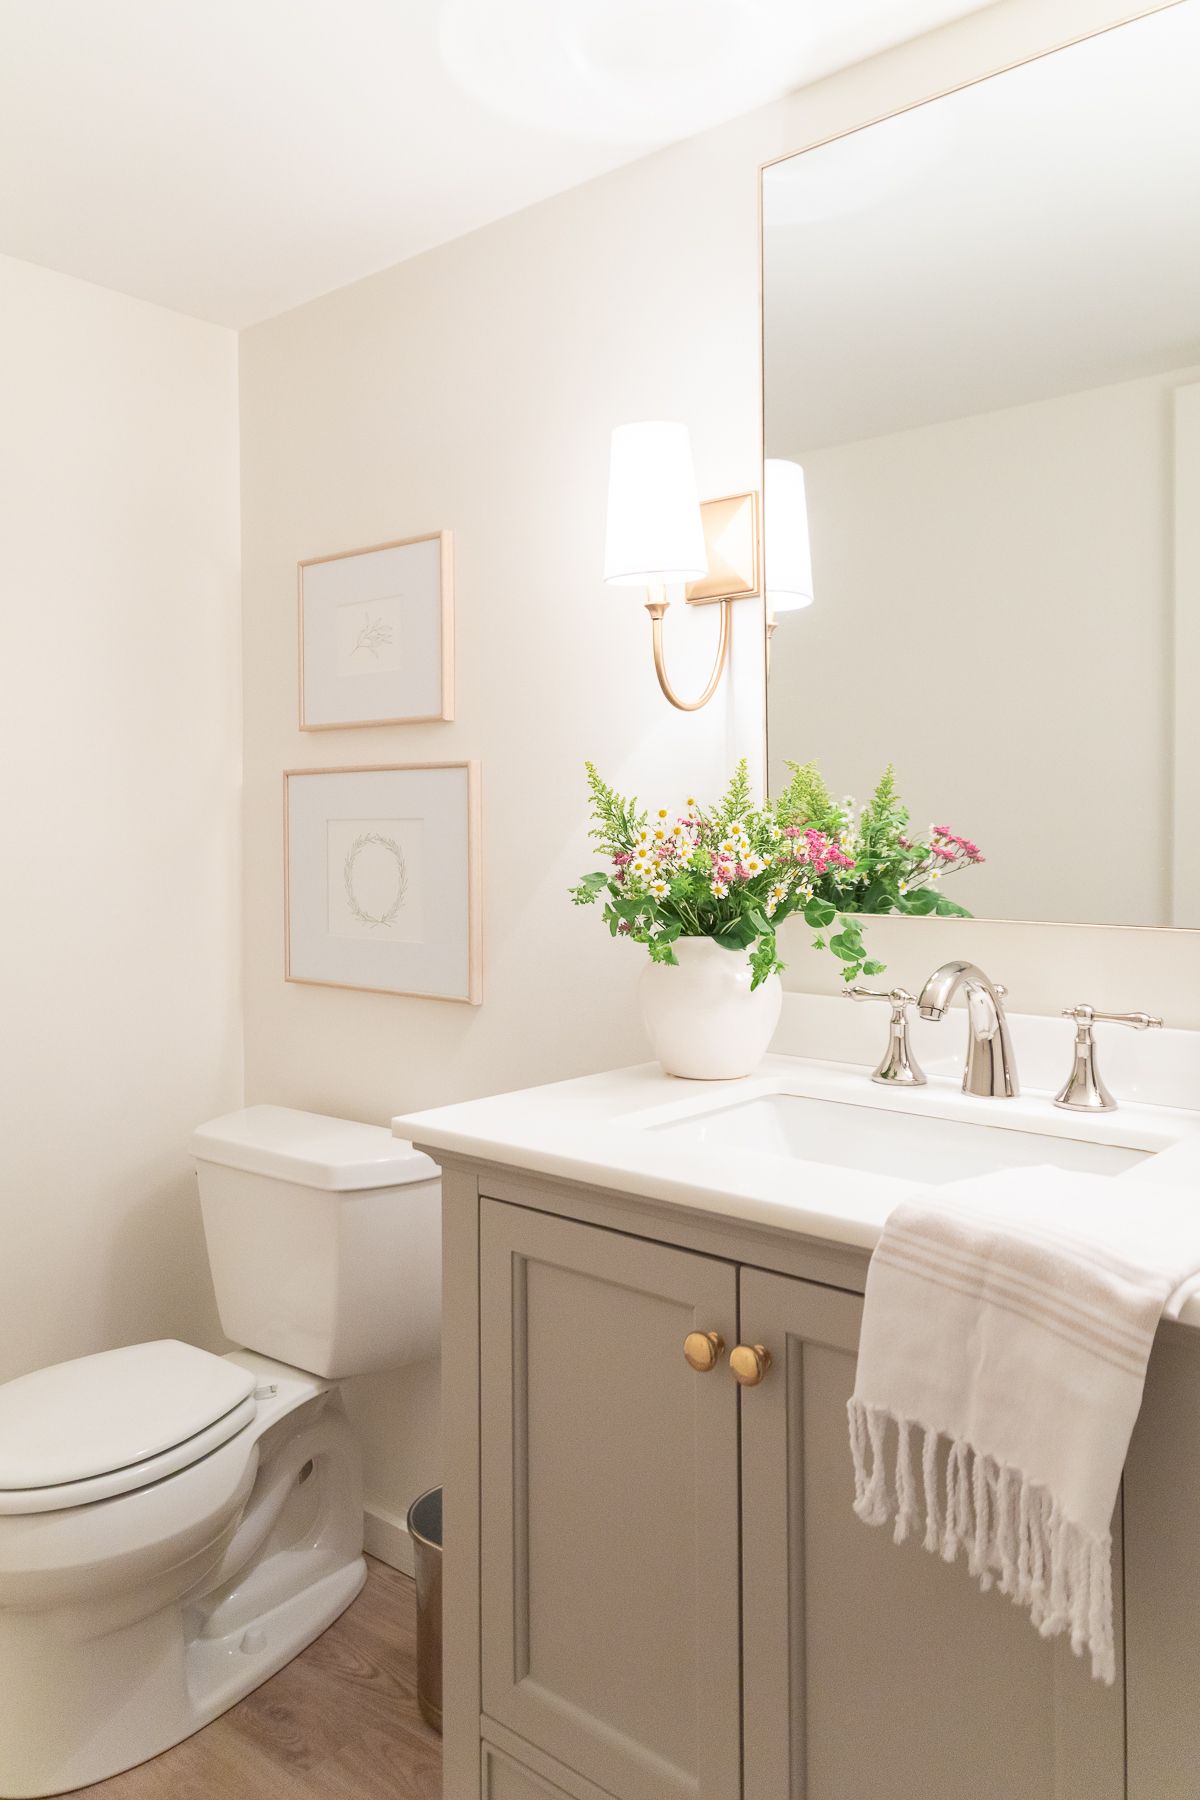 A bathroom with a greige vanity and cream walls